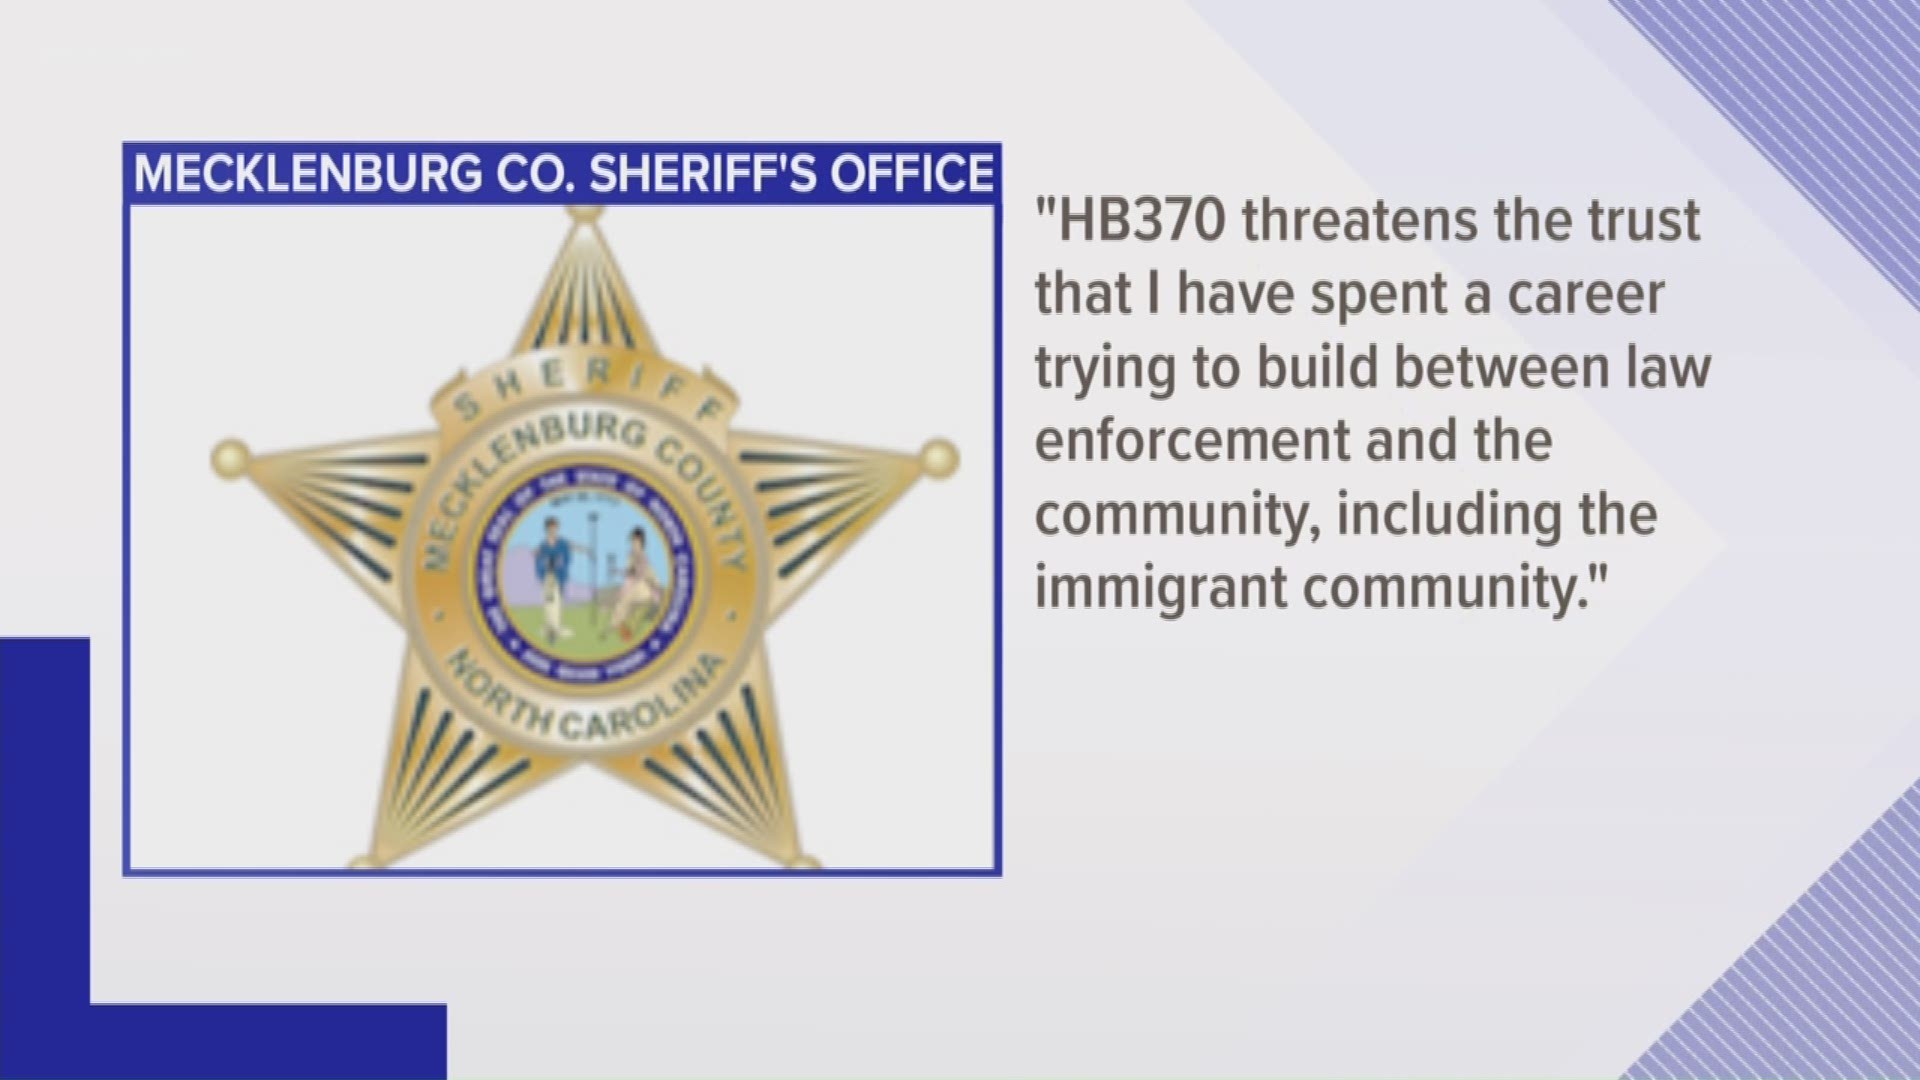 The bill requires sheriff's departments across the state to check everyone they arrest against the federal immigration database and potentially hold them on a detainer for ICE.